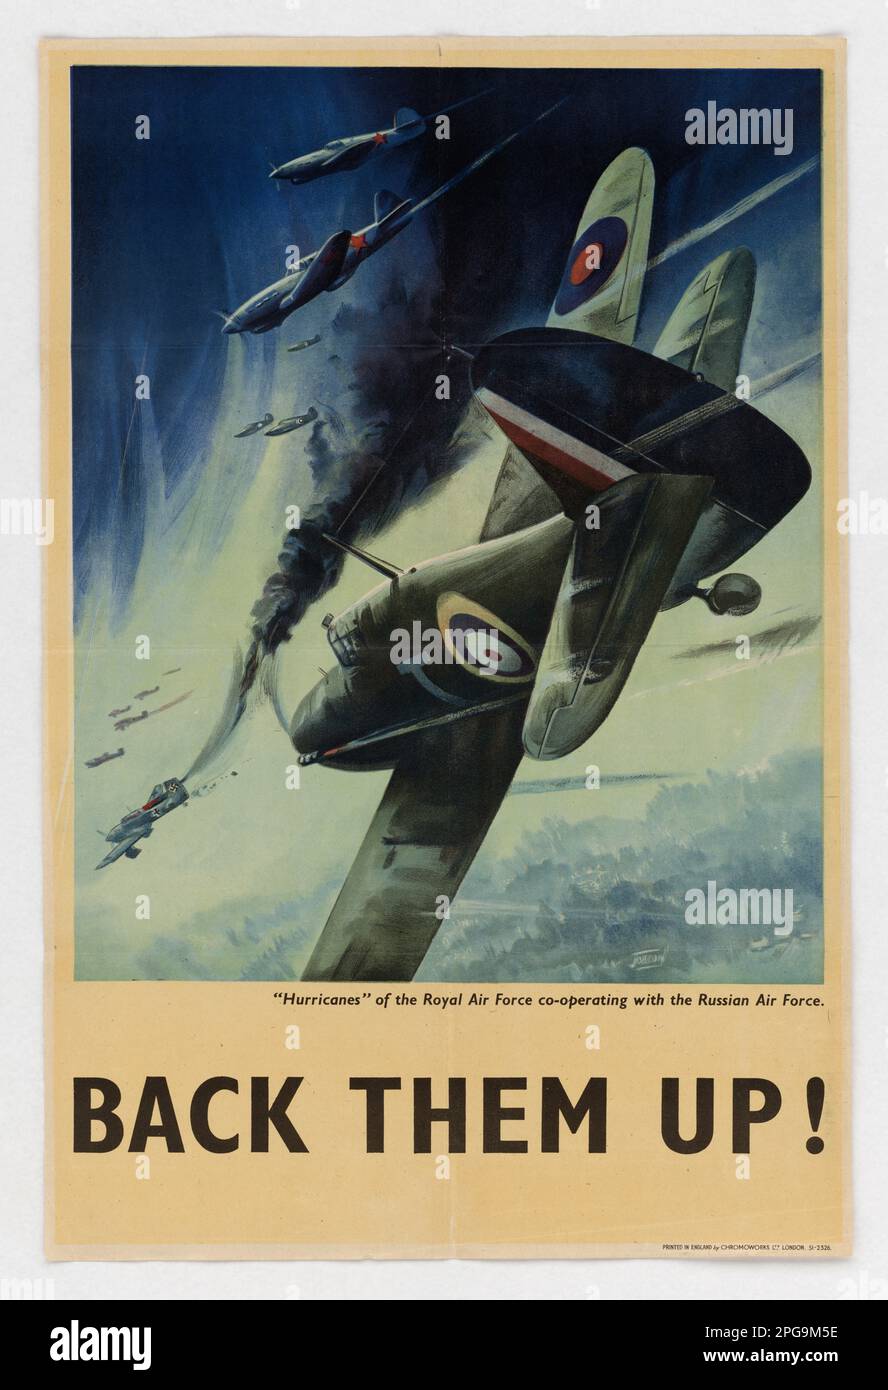 'Hurricanes' is a World War II foreign poster created by Ron Jobson in England between 1942-1945. Printed by Chromoworks Ltd., it was produced by the Office for Emergency Management and Office of War Information to encourage support for the cooperation between the Royal Air Force and the Russian Air Force during the war. Stock Photo